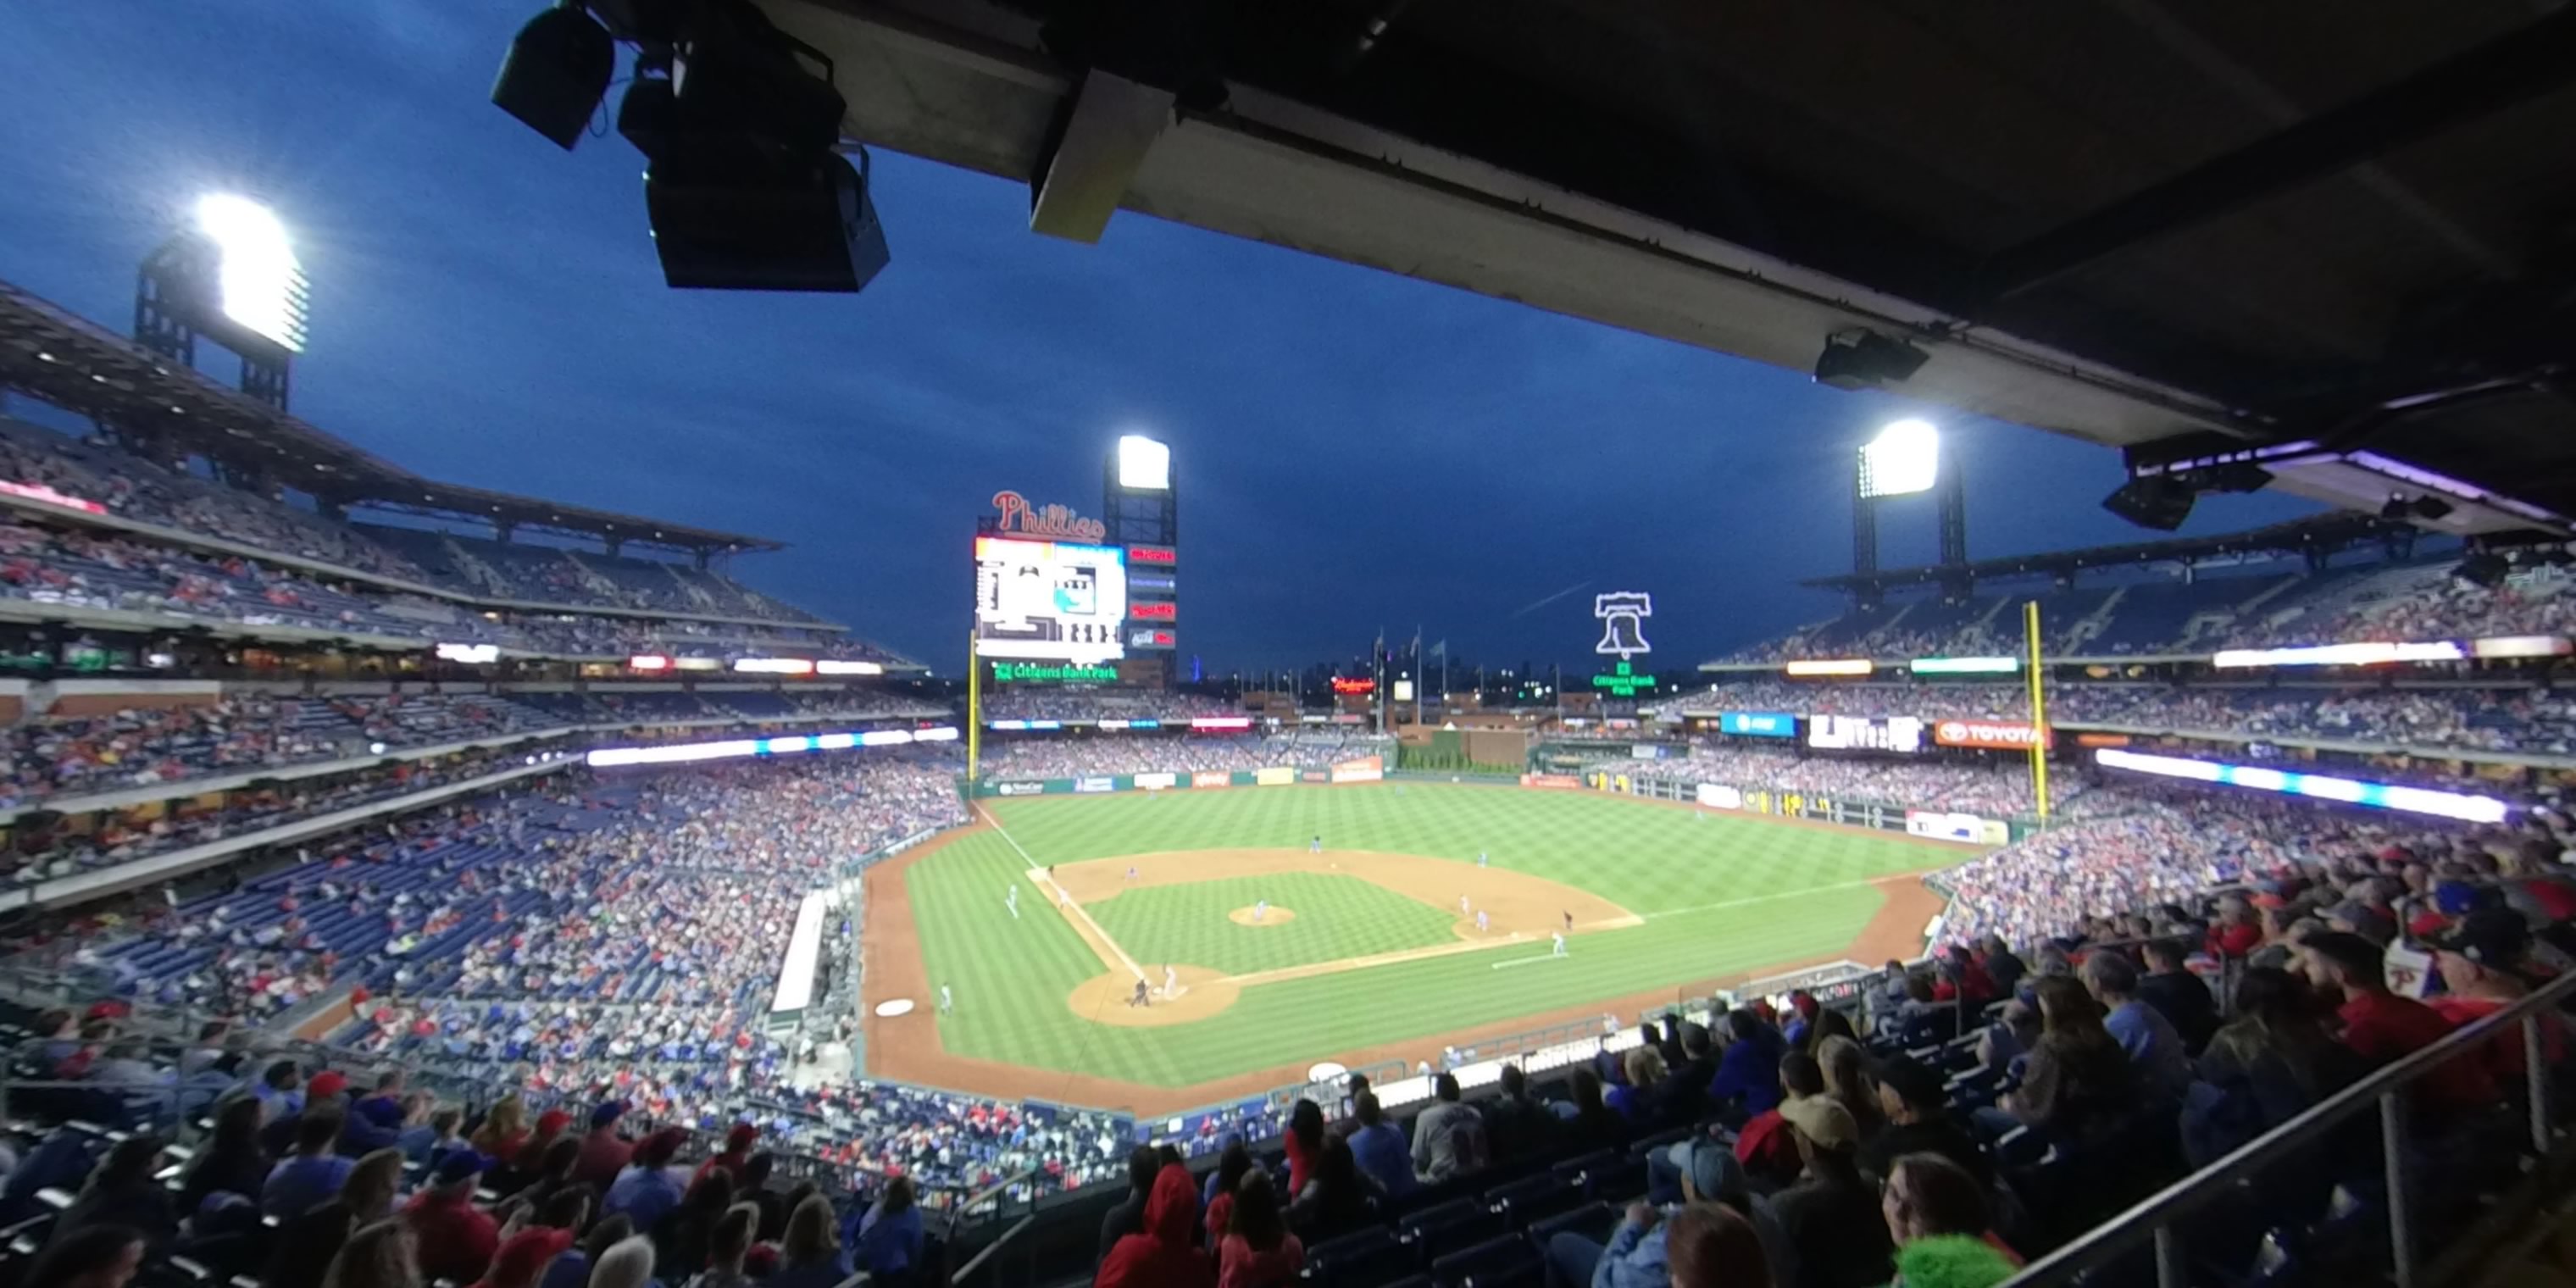 section 219 panoramic seat view  for baseball - citizens bank park